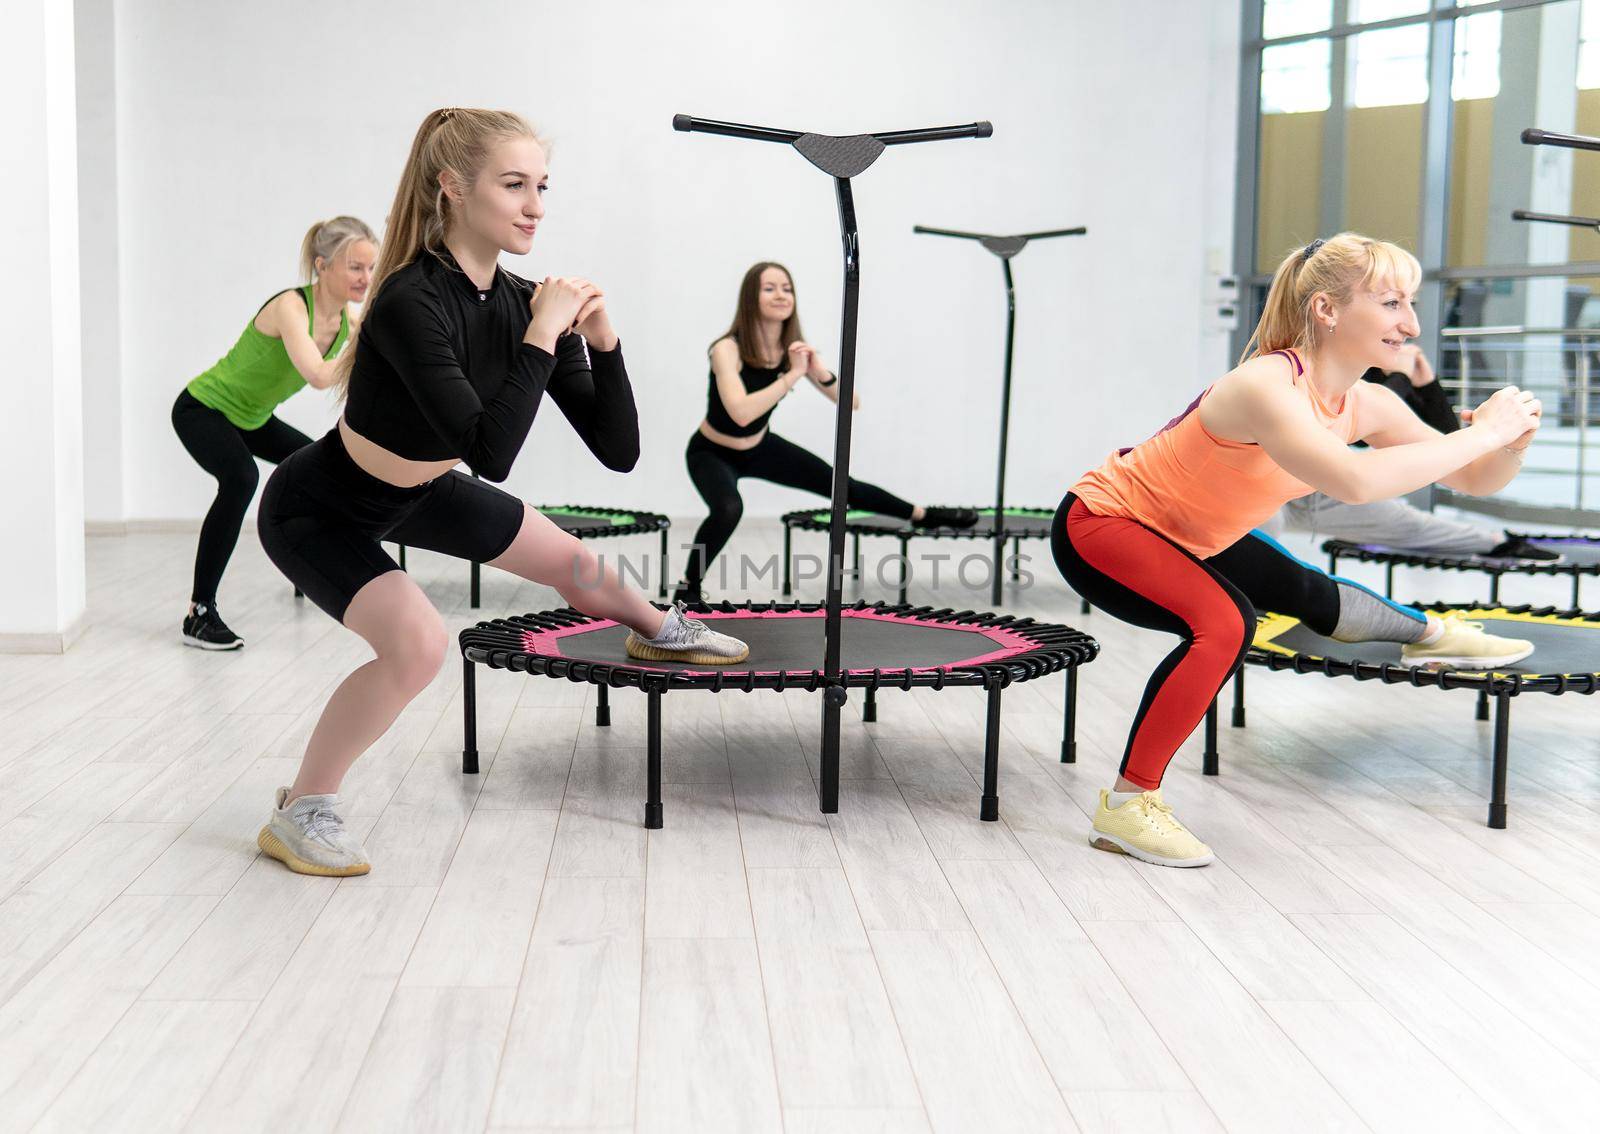 Trampoline for fitness girls are engaged in professional sports, the concept of a healthy lifestyle jumping trampoline woman fitness gym training, from exercise active from activity from energy wellness, club weight. Sportswear caucasian motion, physical